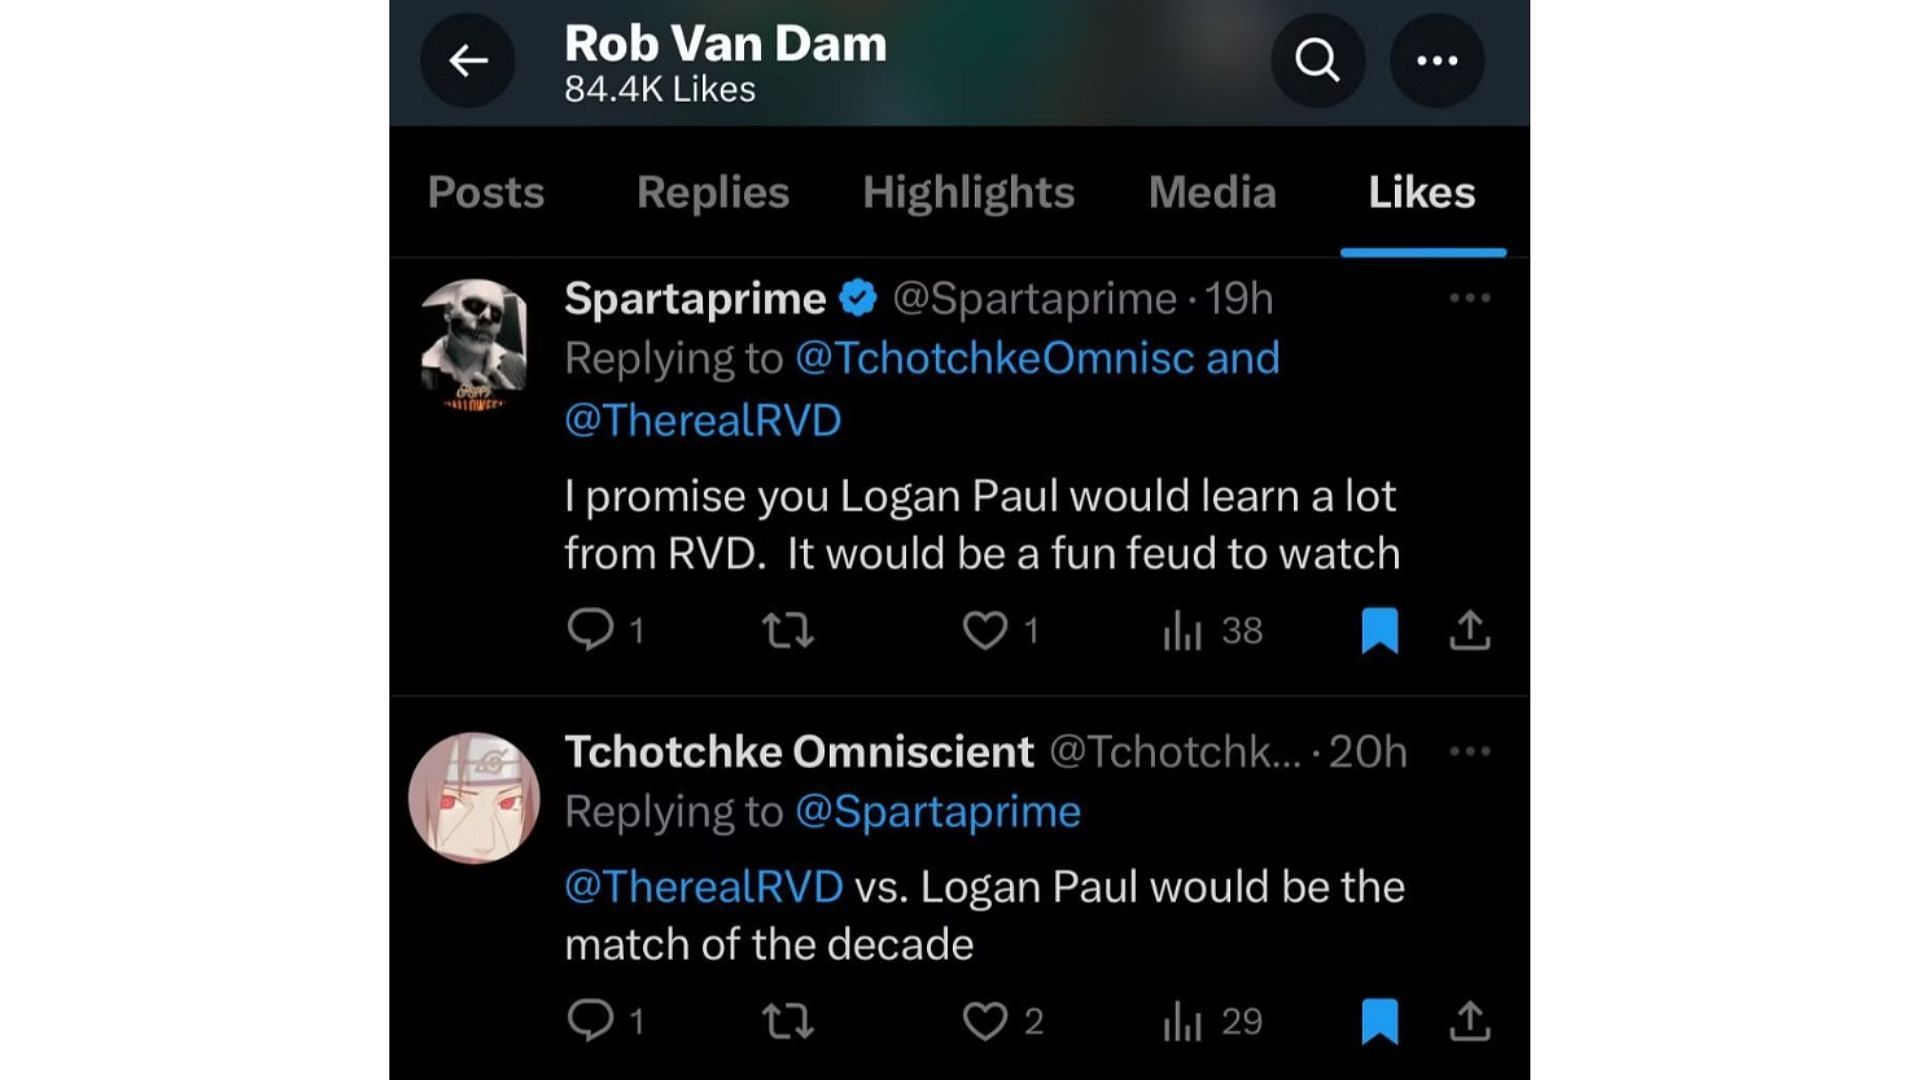 Rob Van Dam liked fan tweets about a feud with Logan Paul